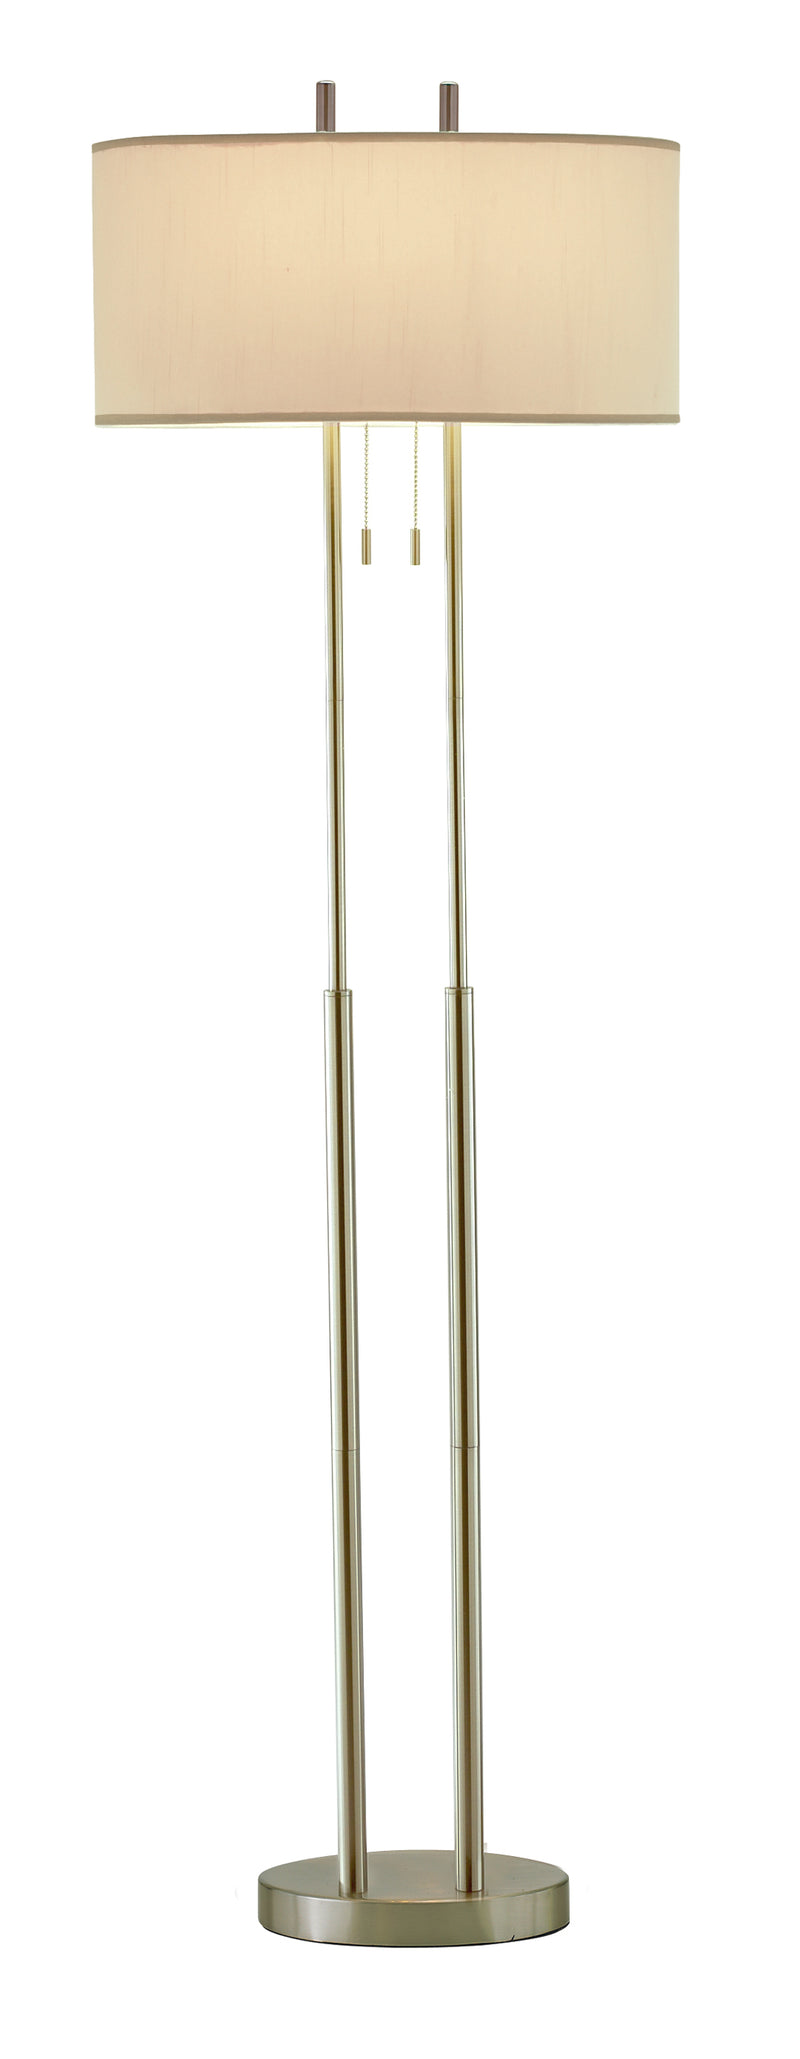 Home Outfitters Dual Pole Floor Lamp In Brushed Steel Metal